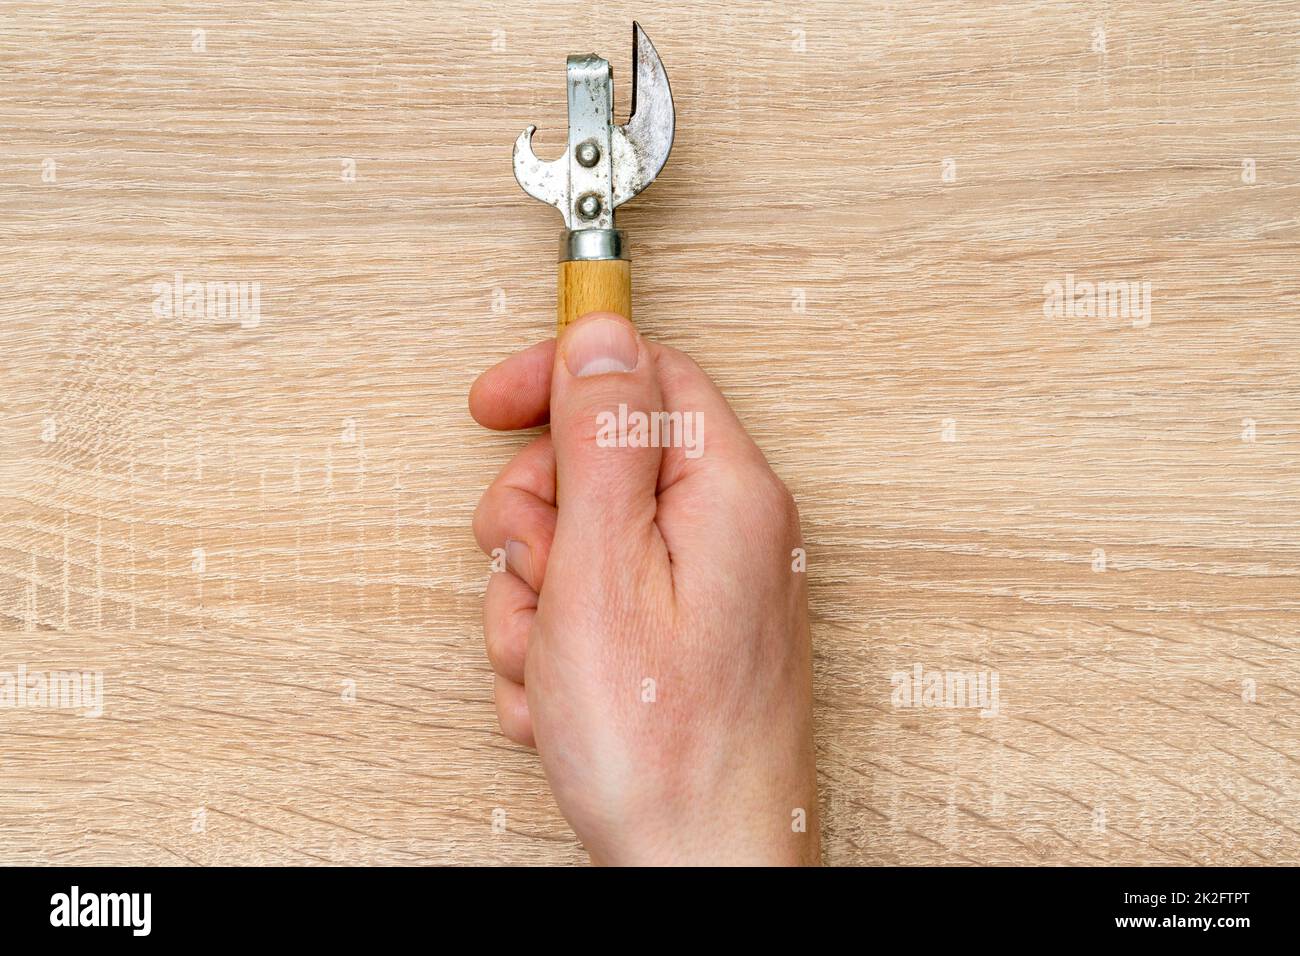 Men hand holds old can opener Stock Photo